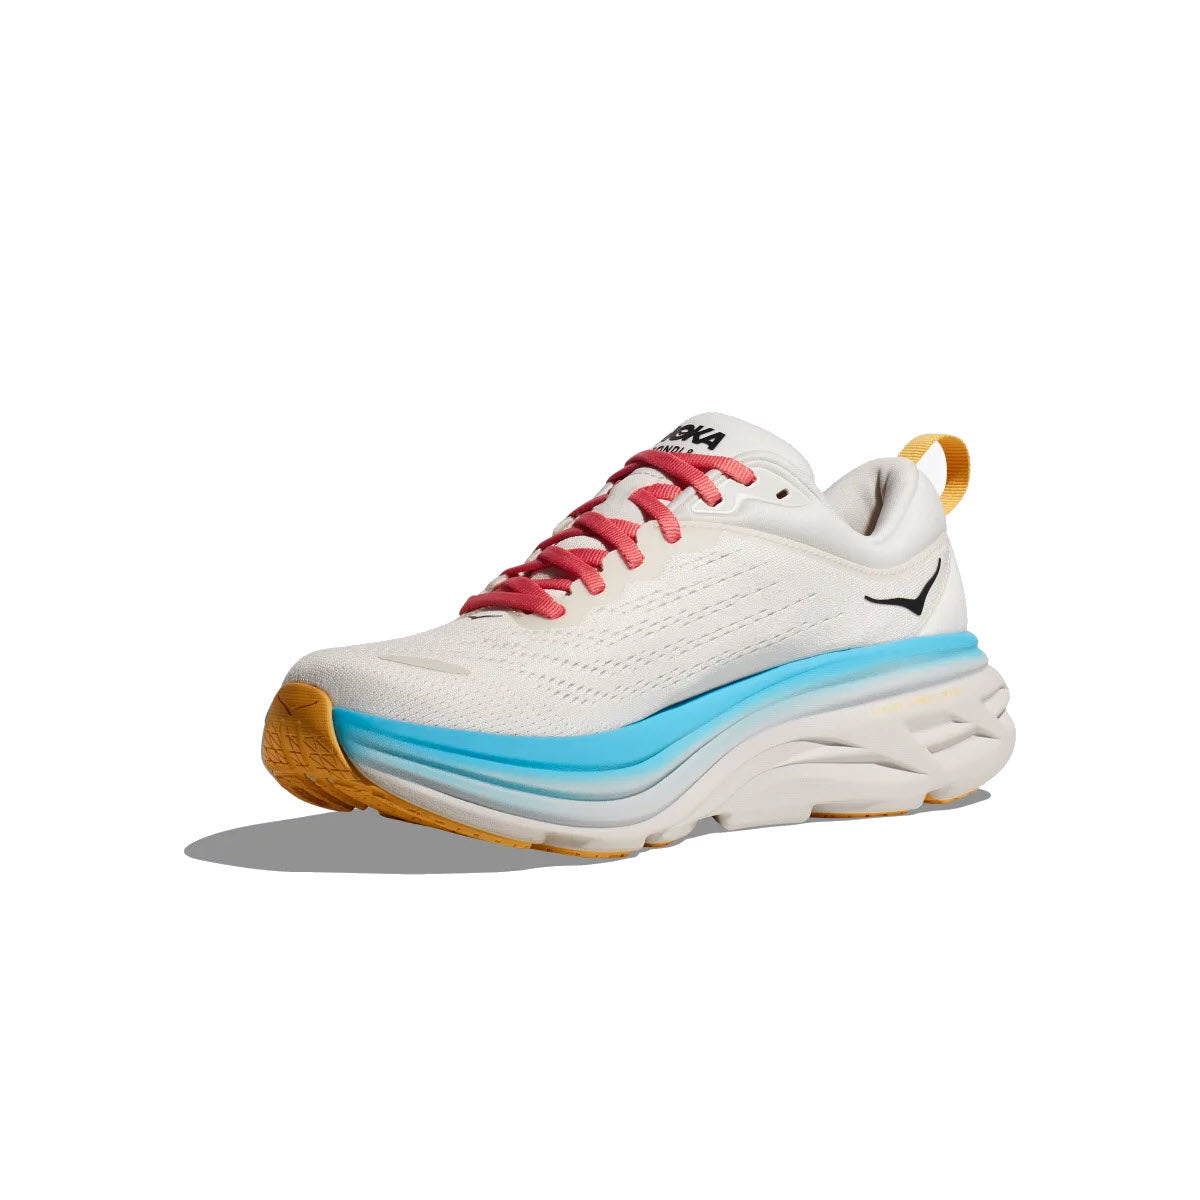 A white HOKA BONDI 8 BLANC DE BLANC/SWIM DAY - WOMEN running shoe with red laces, a teal blue wave pattern on the sole, and a black logo on the side, displayed against a white background. This shoe is designed as part of the Hoka brand.